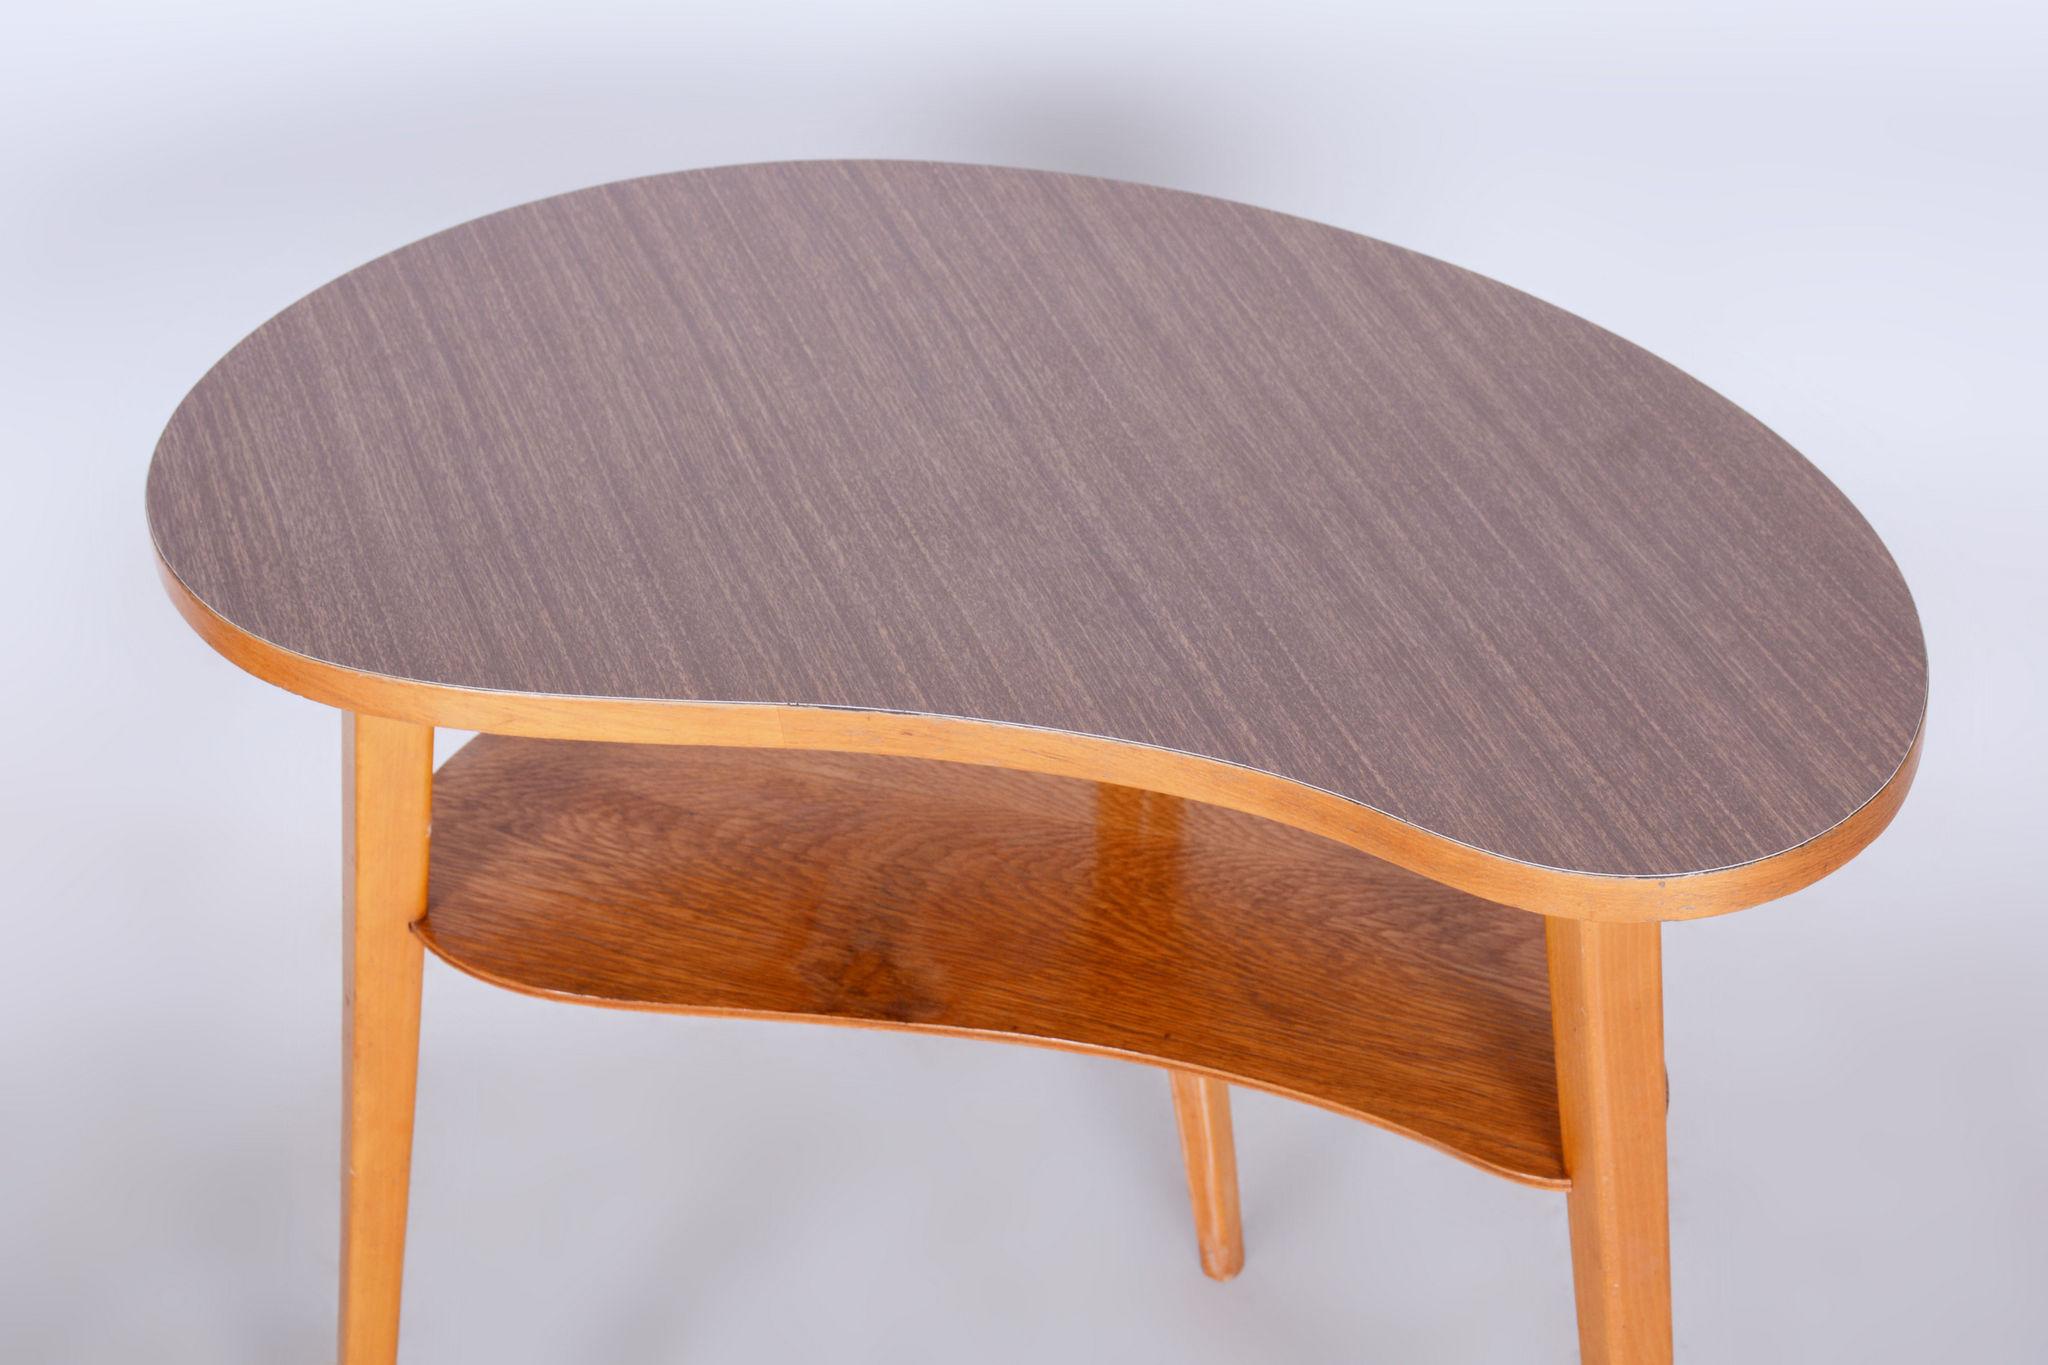 Original Beech MidCentury Small Table, Well Preserved Condition, Czechia, 1950s For Sale 1